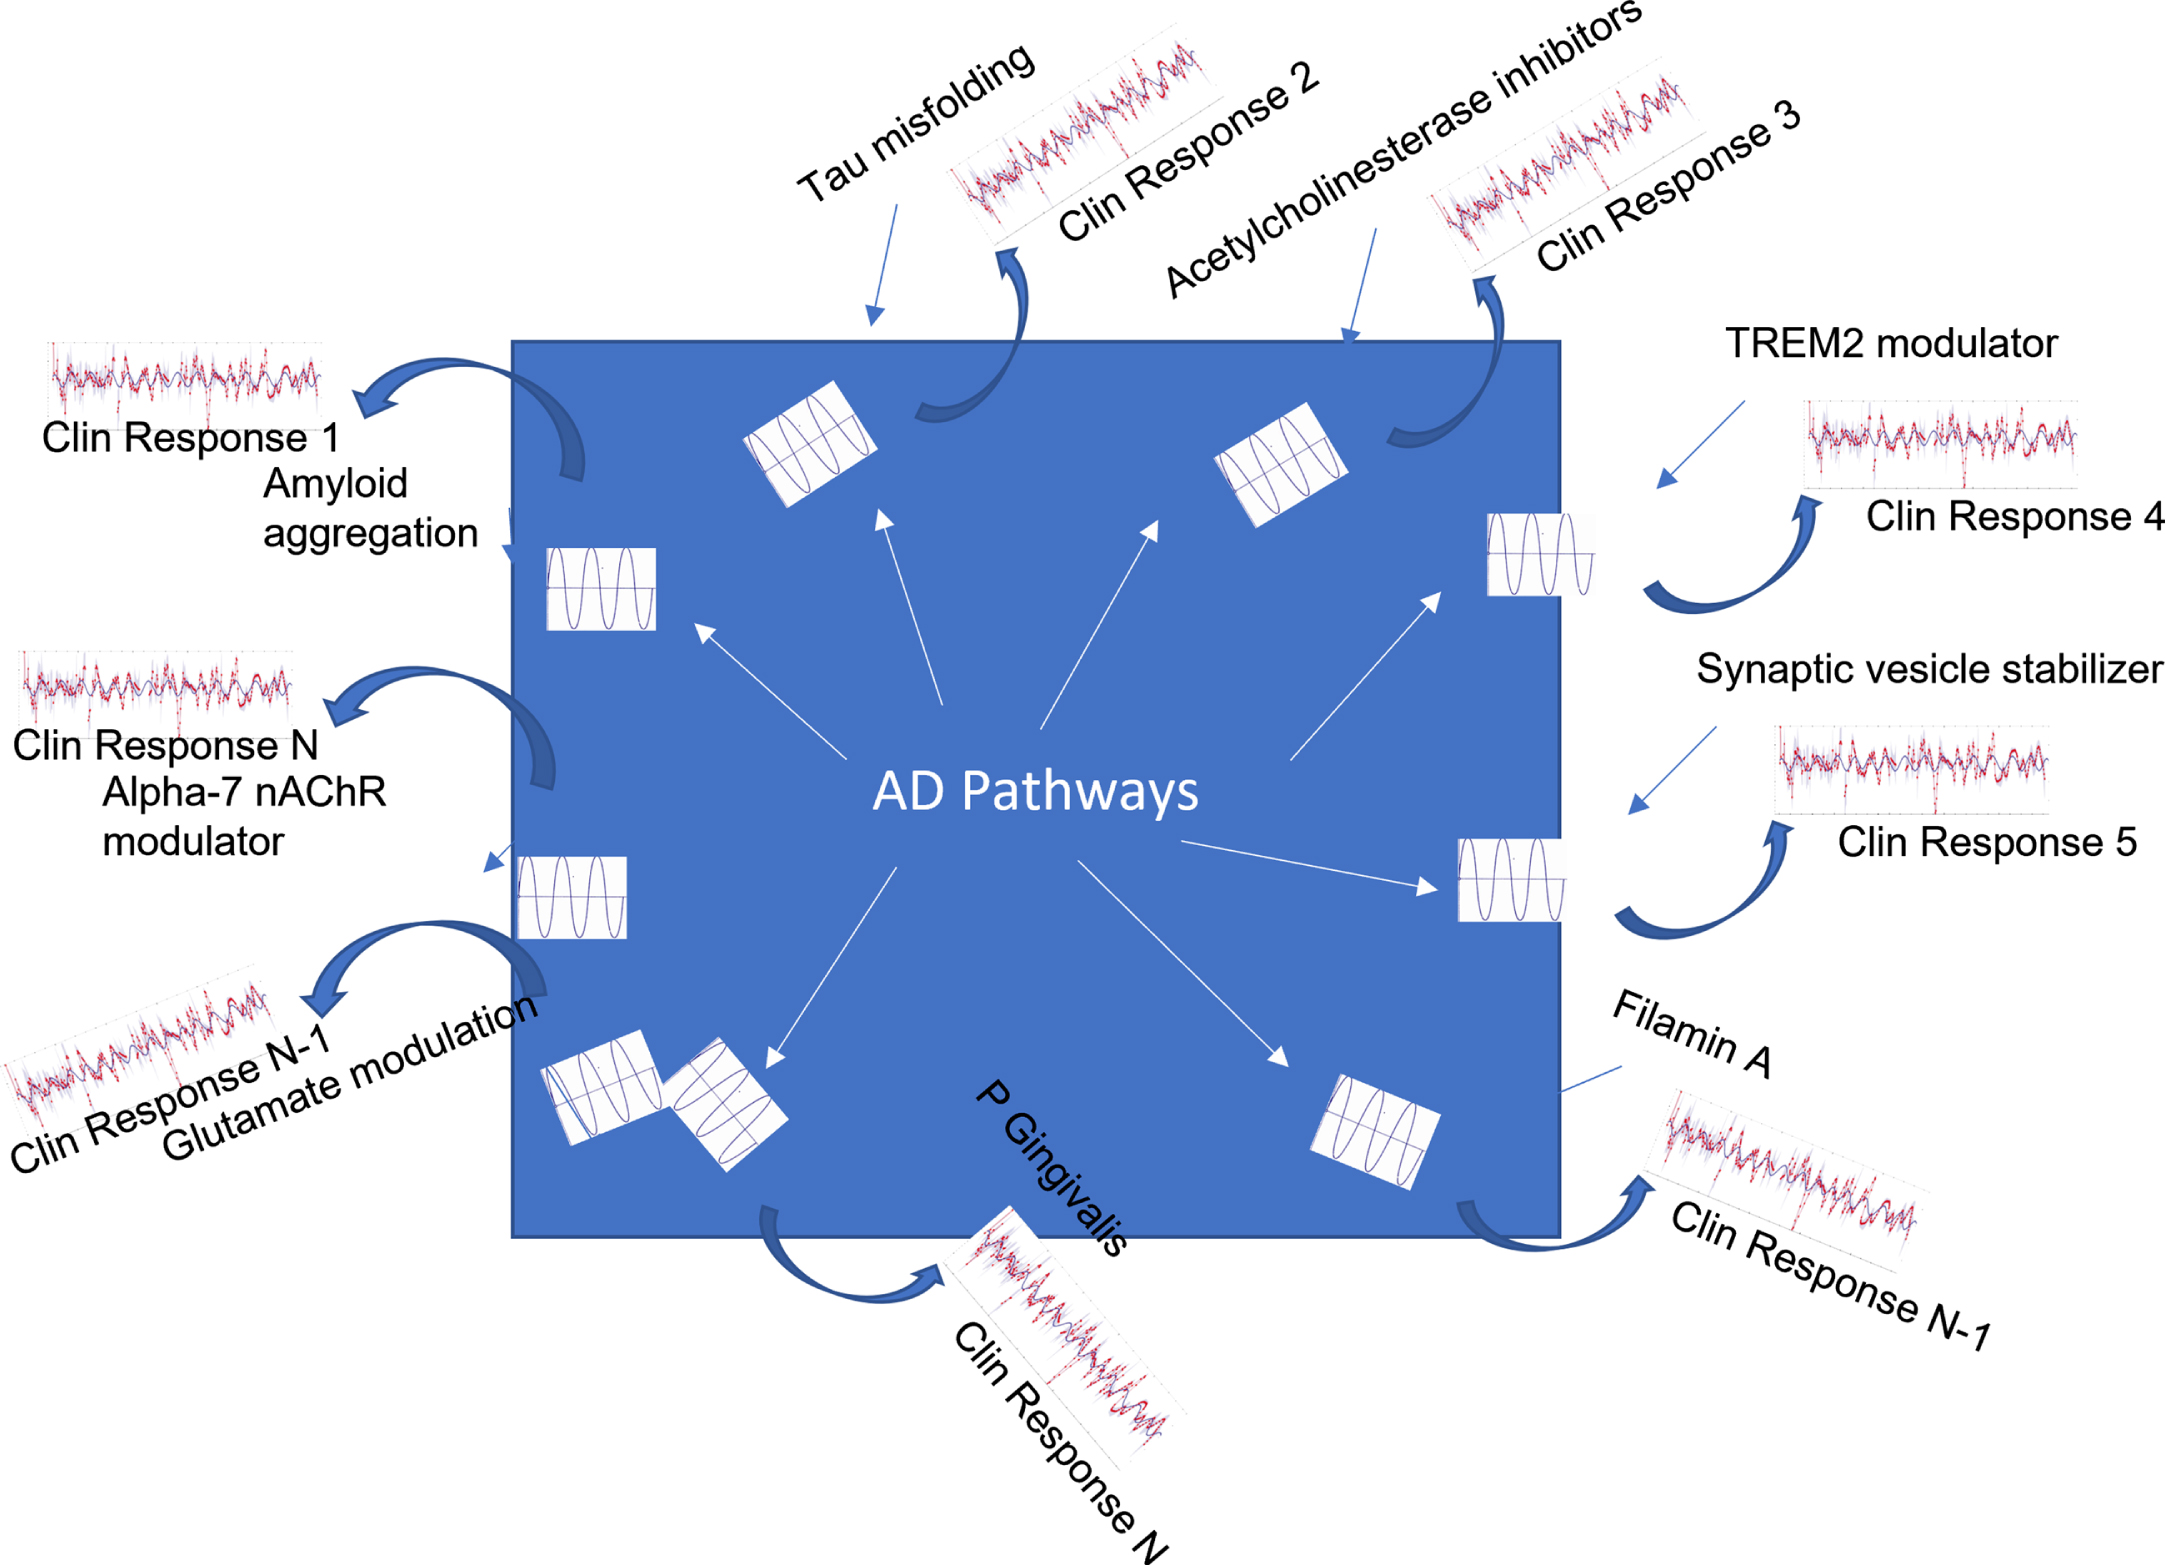 Schematic representation of the ‘seismology’ strategy for elucidating key pathways driving the AD phenotype. Using the concept of AD pathology as a black box, each clinical trial (1 ...  N) with a drug acting on a specific target (here a few examples are given for which clinical data in principle are available) can be considered a highly localized challenge that generates a perturbation inside the system and generating a reaction captured as the clinical outcome of that intervention. This response is a highly complex combination of the underlying pathology and the pharmacodynamic activity and pharmacokinetic profile of the drug. The challenge is to “deconvolute” this response so as to generate actionable knowledge about the internal pathways and circuits triggered by this perturbation. Modeling these “interventions” in an actionable computer model using available information about the pharmacology of the drug together with extensive biological and genetic knowledge can significantly speed up this process. In principle, this would allow us to gradually document more and more complex pathways and their interactions in the human patients.